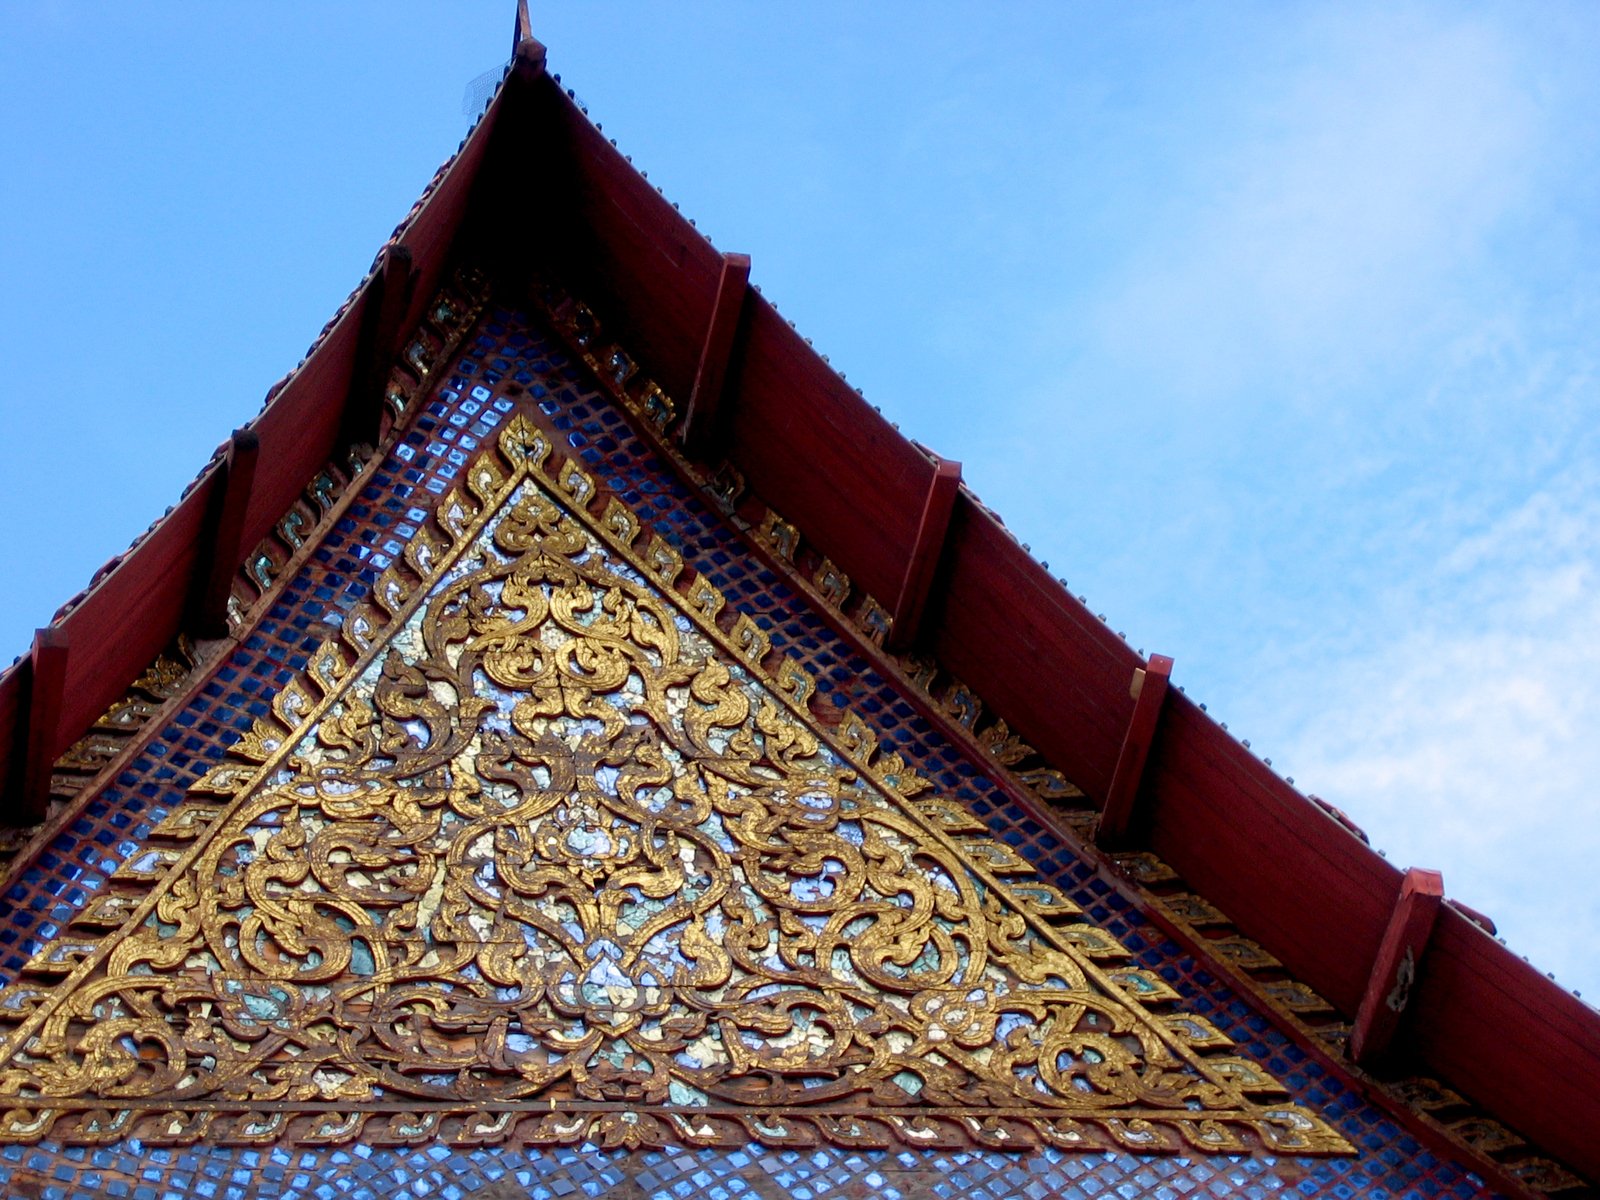 a decorative gold - leafed roof has been used to decorate the walls